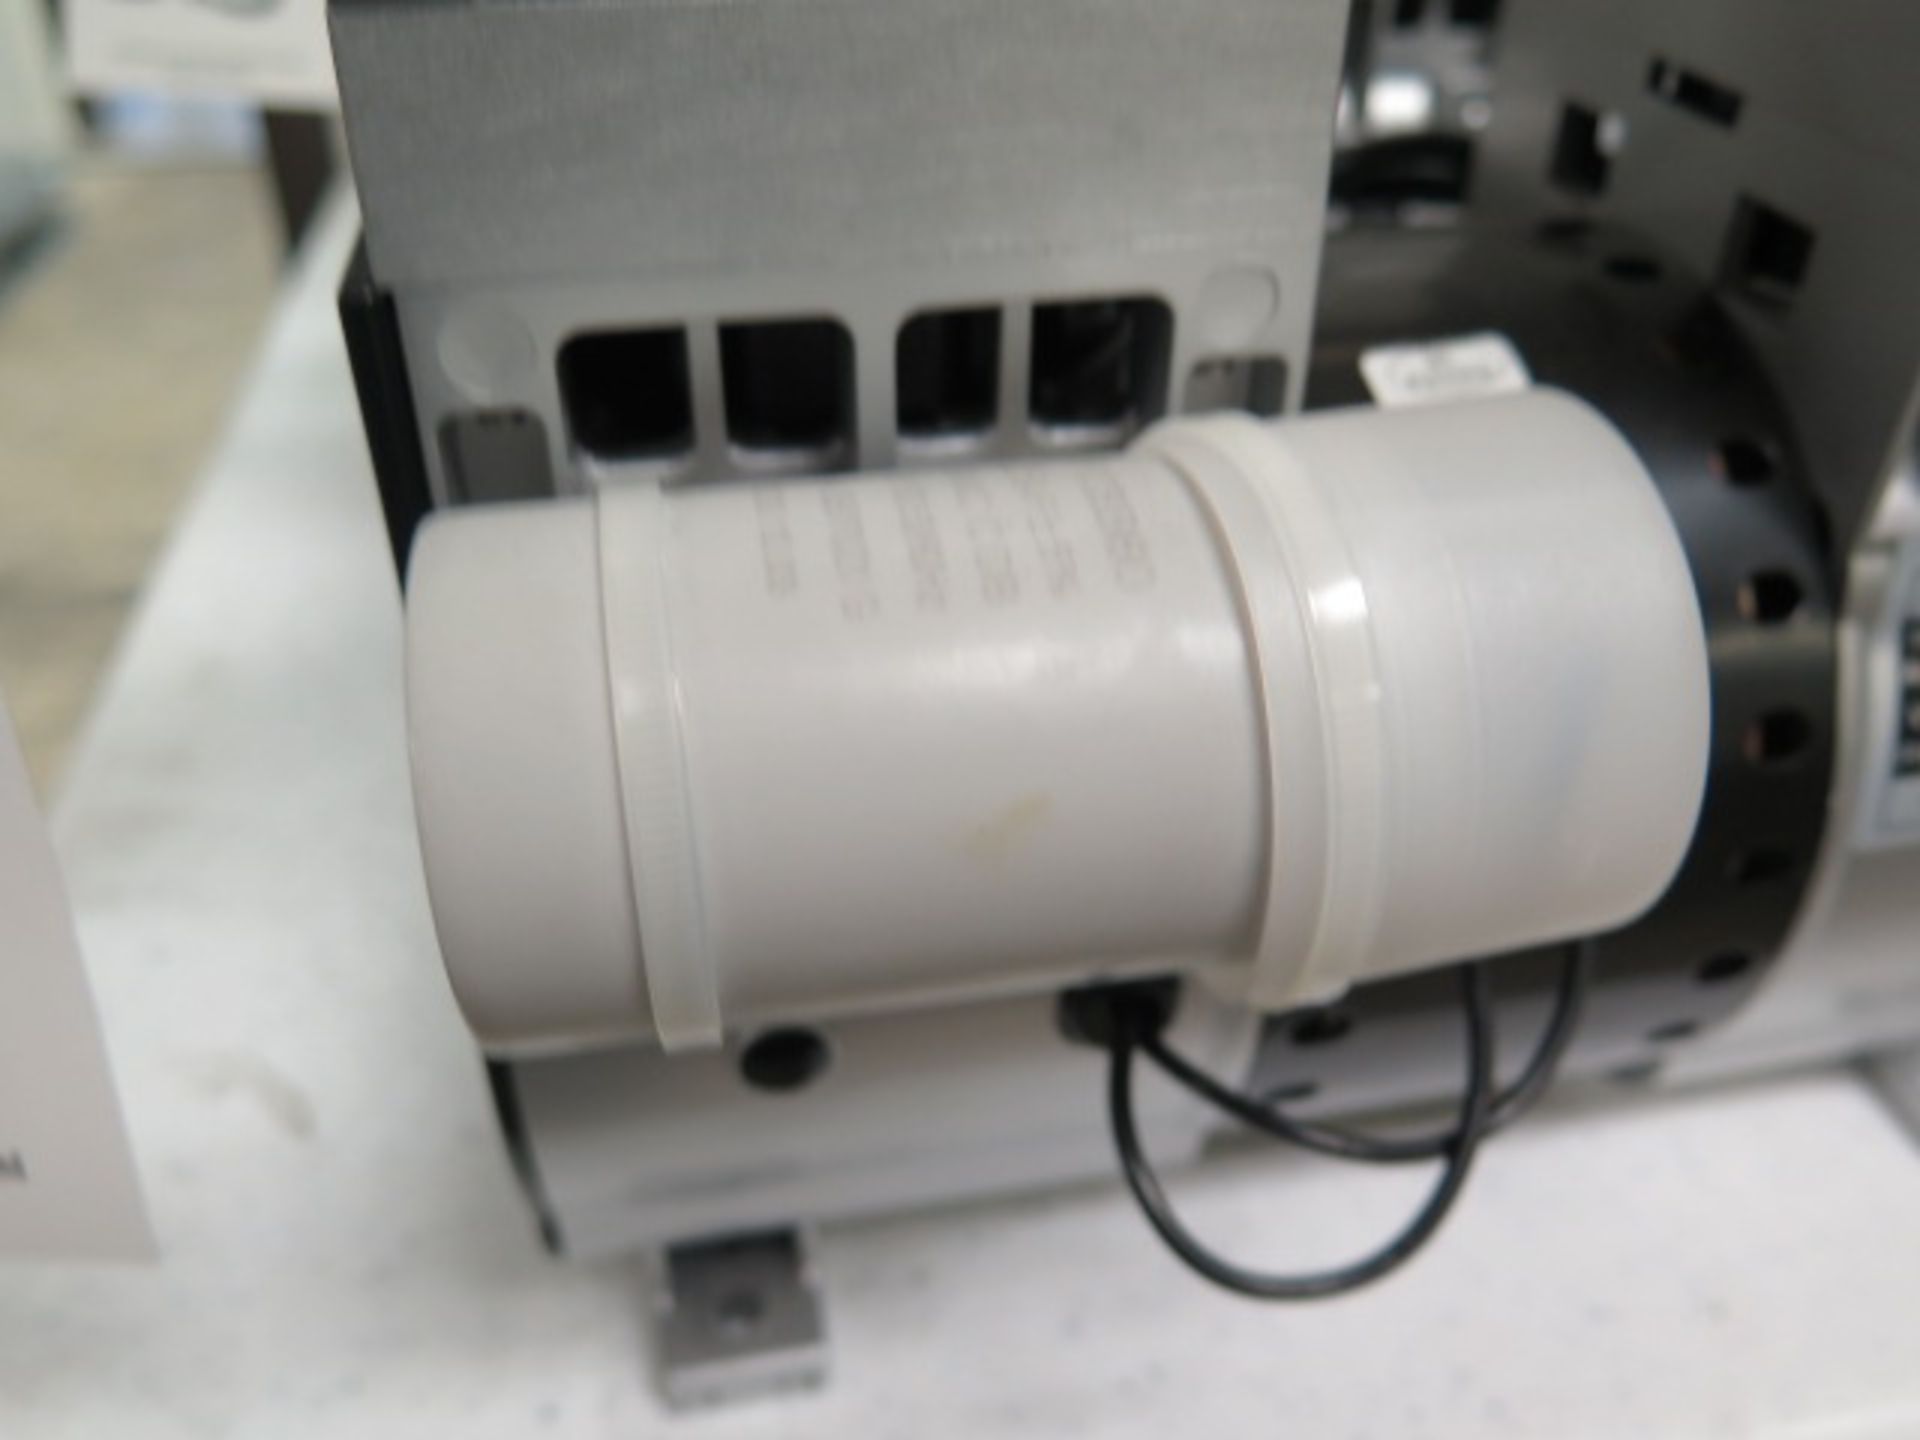 Airtech HP-200V 80 torr Vacuum Pumps (2) 200-240V (SOLD AS-IS - NO WARRANTY) - Image 6 of 7